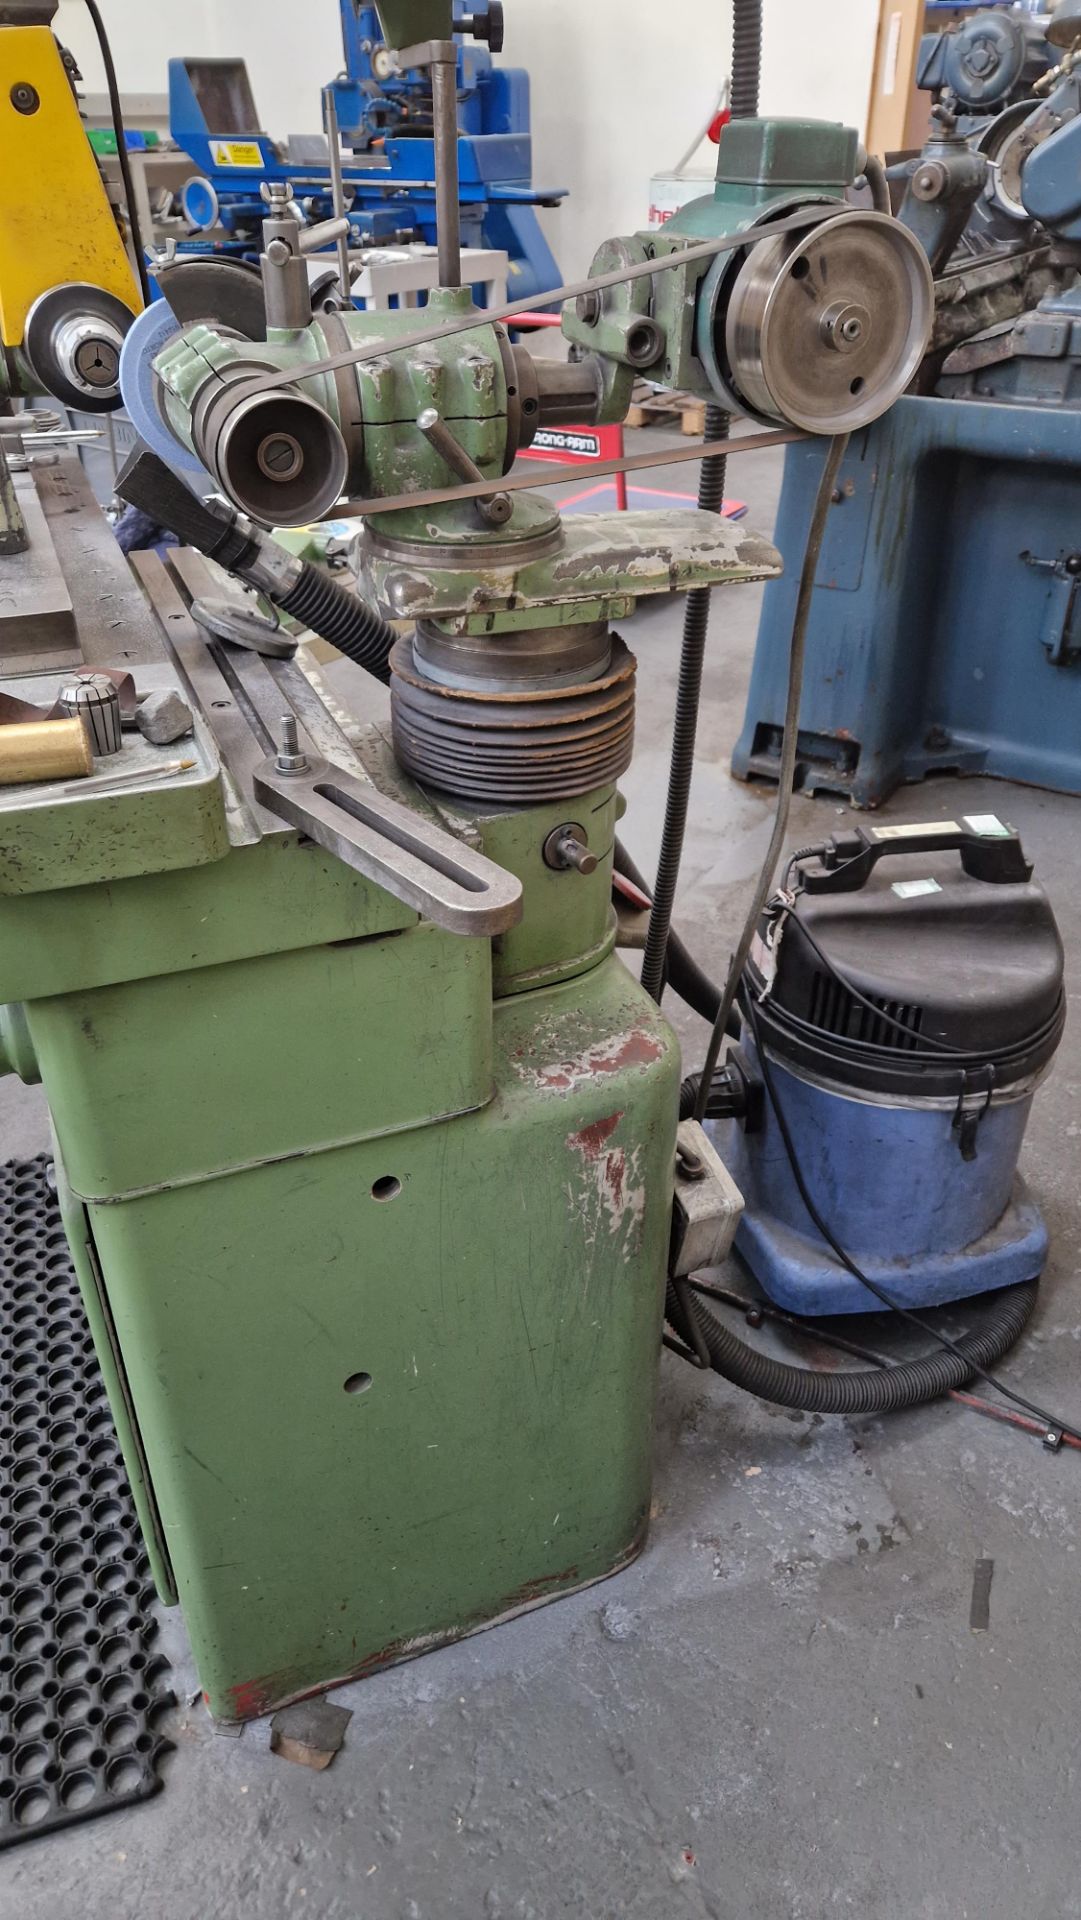 JUNGNER INSTRUMENTS HORIZONTAL GRINDER WITH ASSOCIATED SPARES AND NUMATIC VACUUM - Image 3 of 4